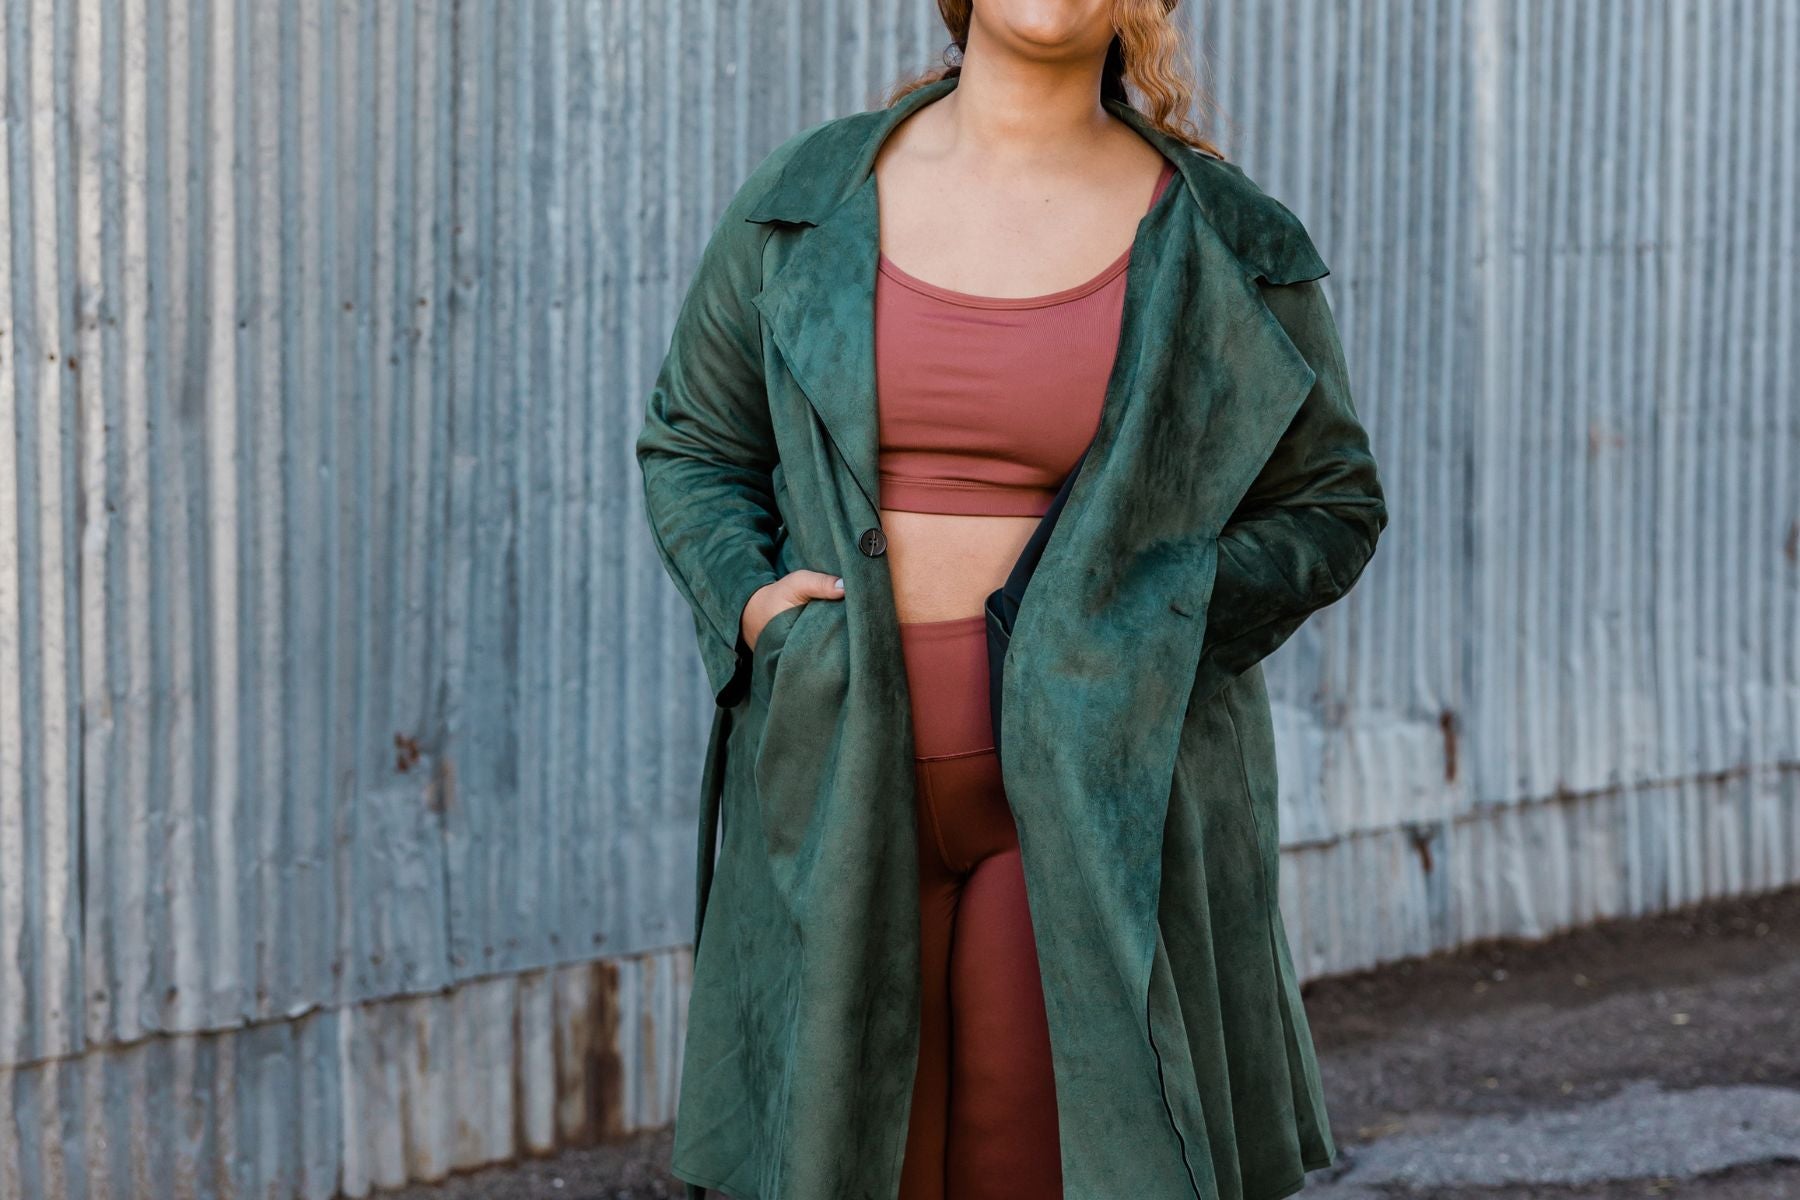 Celebrate Your Body: How to Feel Confident and Look Stunning in Plus Size Clothes